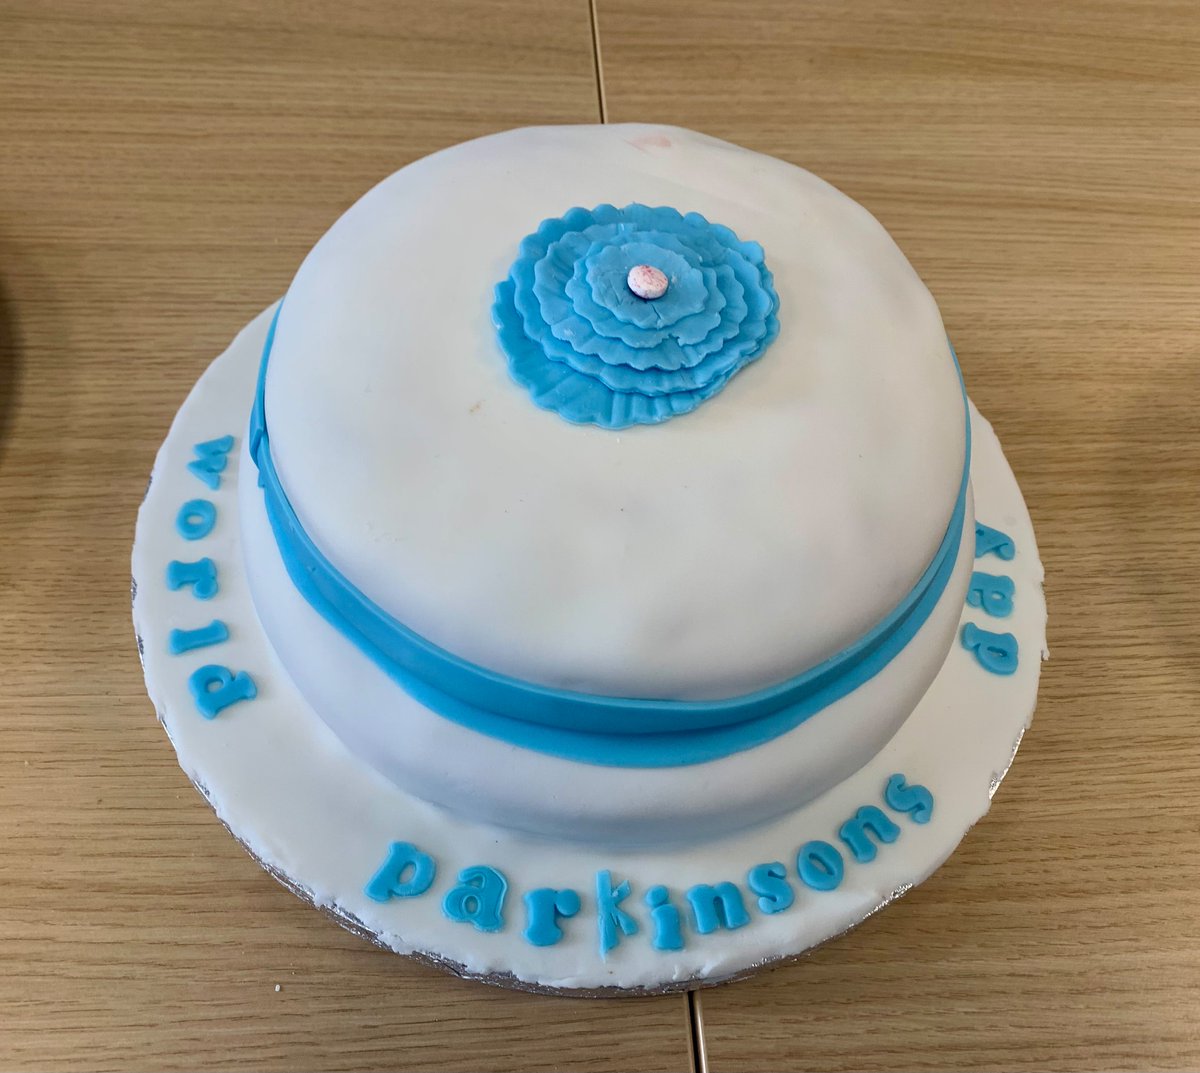 What a cake we had to celebrate World Parkinson’s Day! Thank you @KatrionaKenned1 Delicious!! and enjoyed by volunteers and colleagues alike 😊